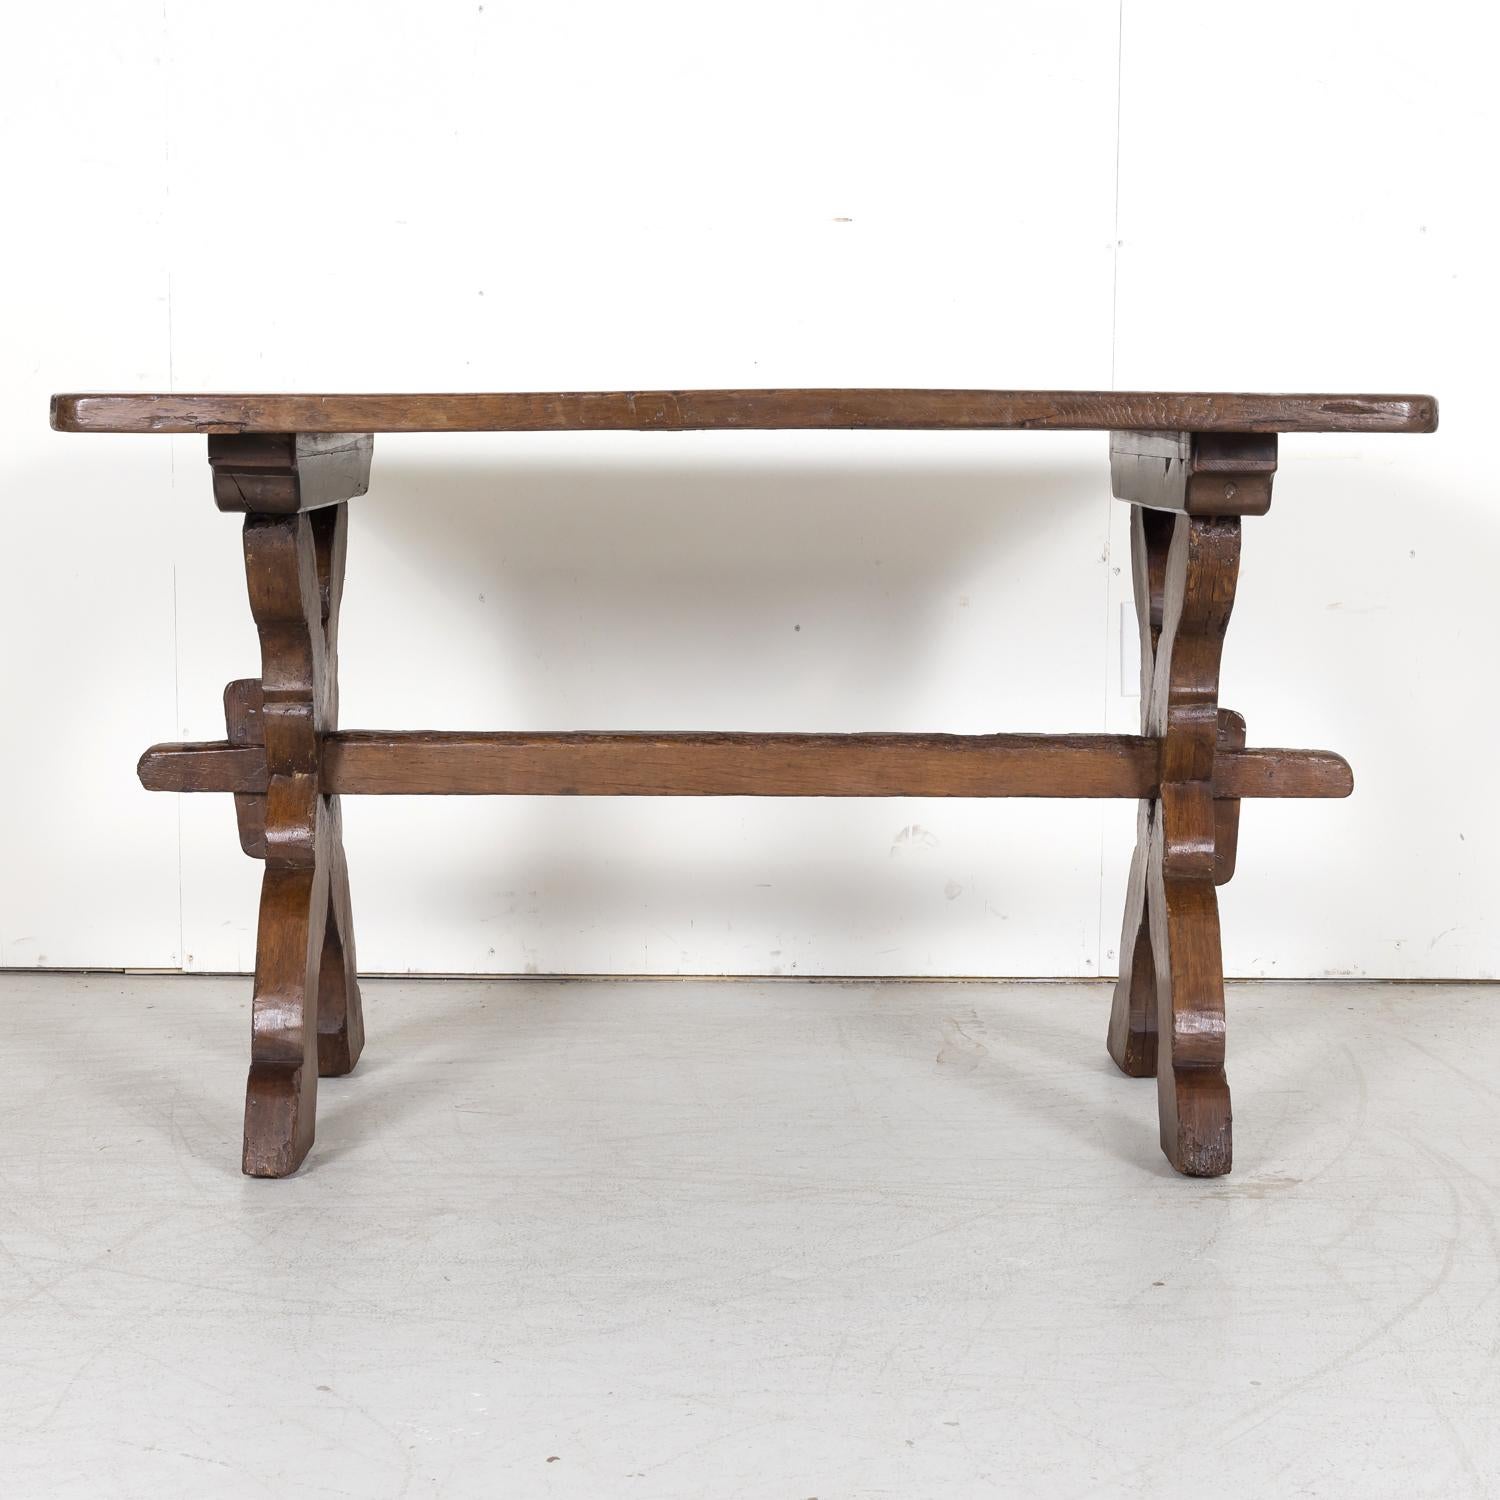 Early 19th Century Primitive Spanish Oak Side Table with X Base and Stretcher 10